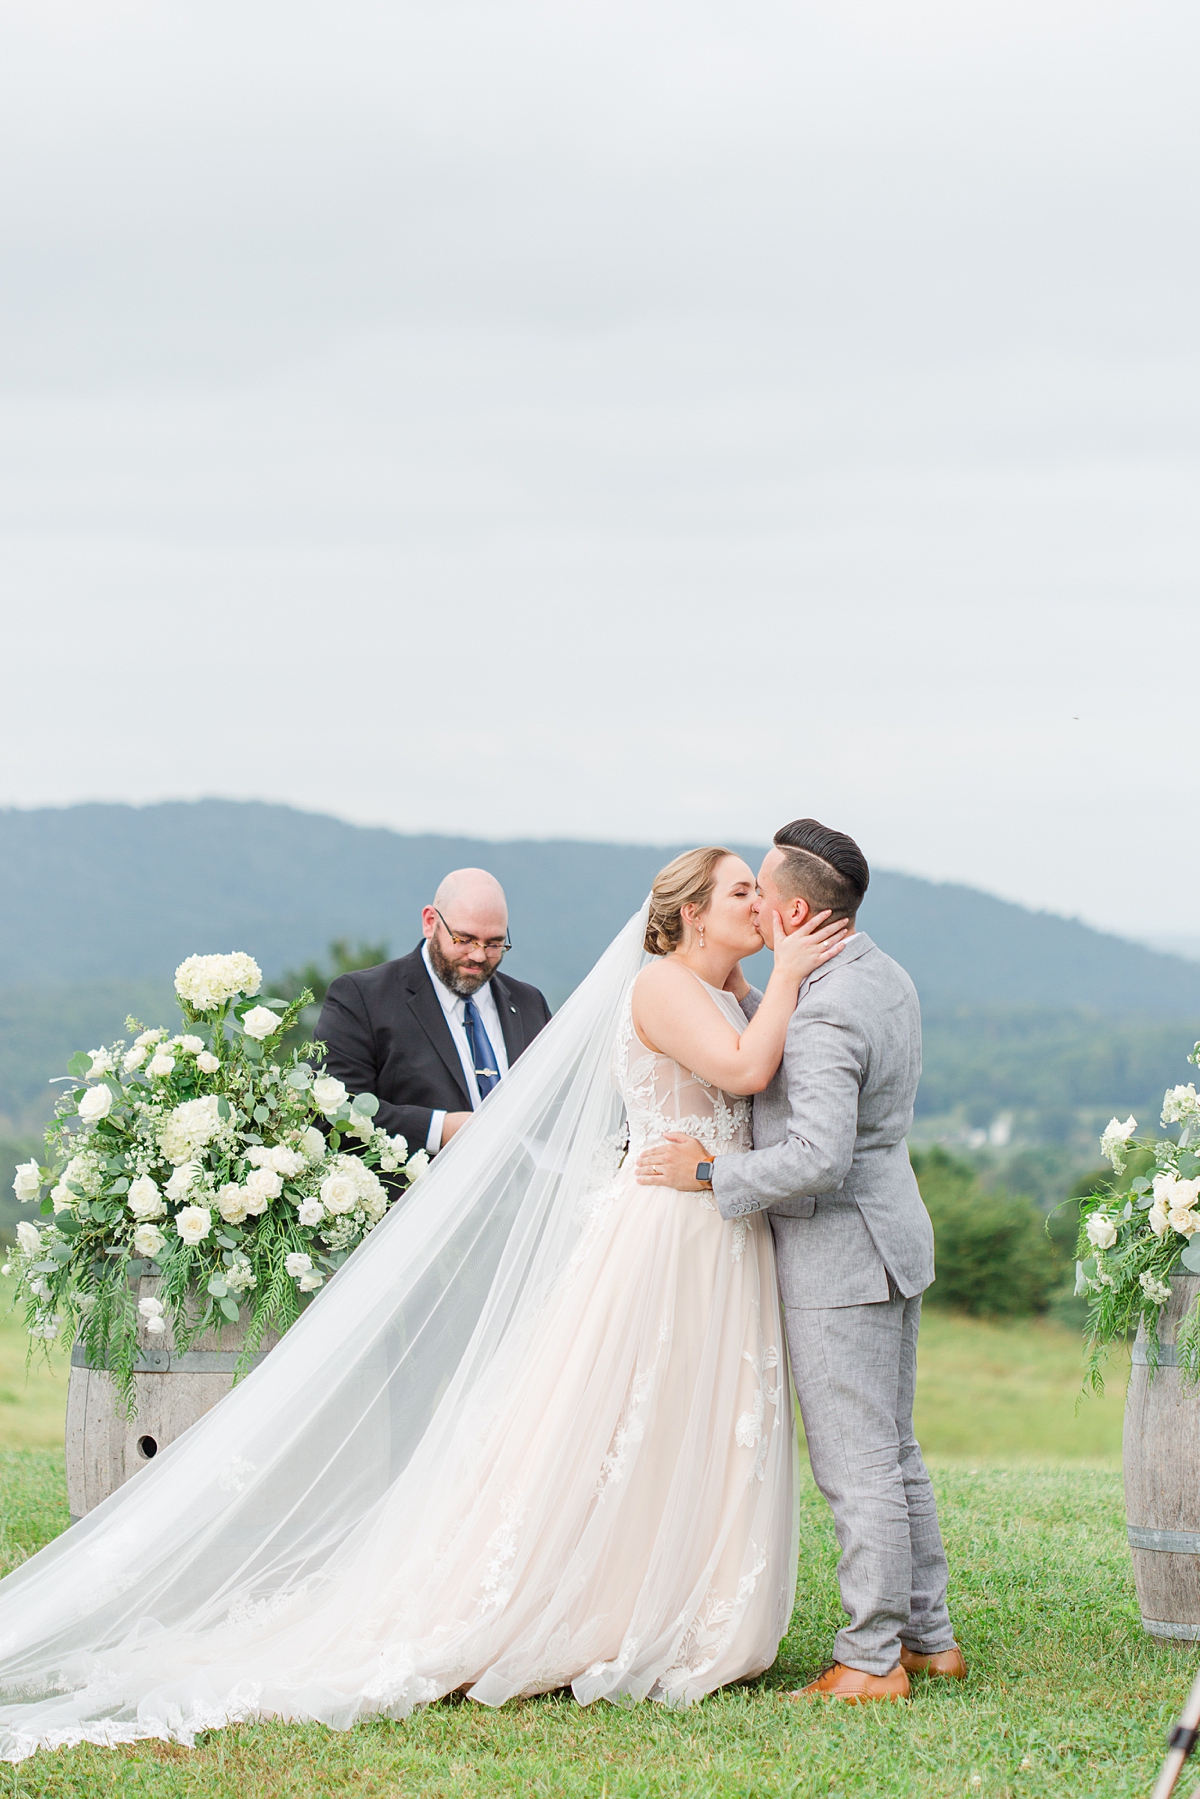 Ceremony Kiss with Mountain View at a Timeless Grace Estate Winery Wedding. Wedding Photography by Virginia Wedding Photographer Kailey Brianne Photography.